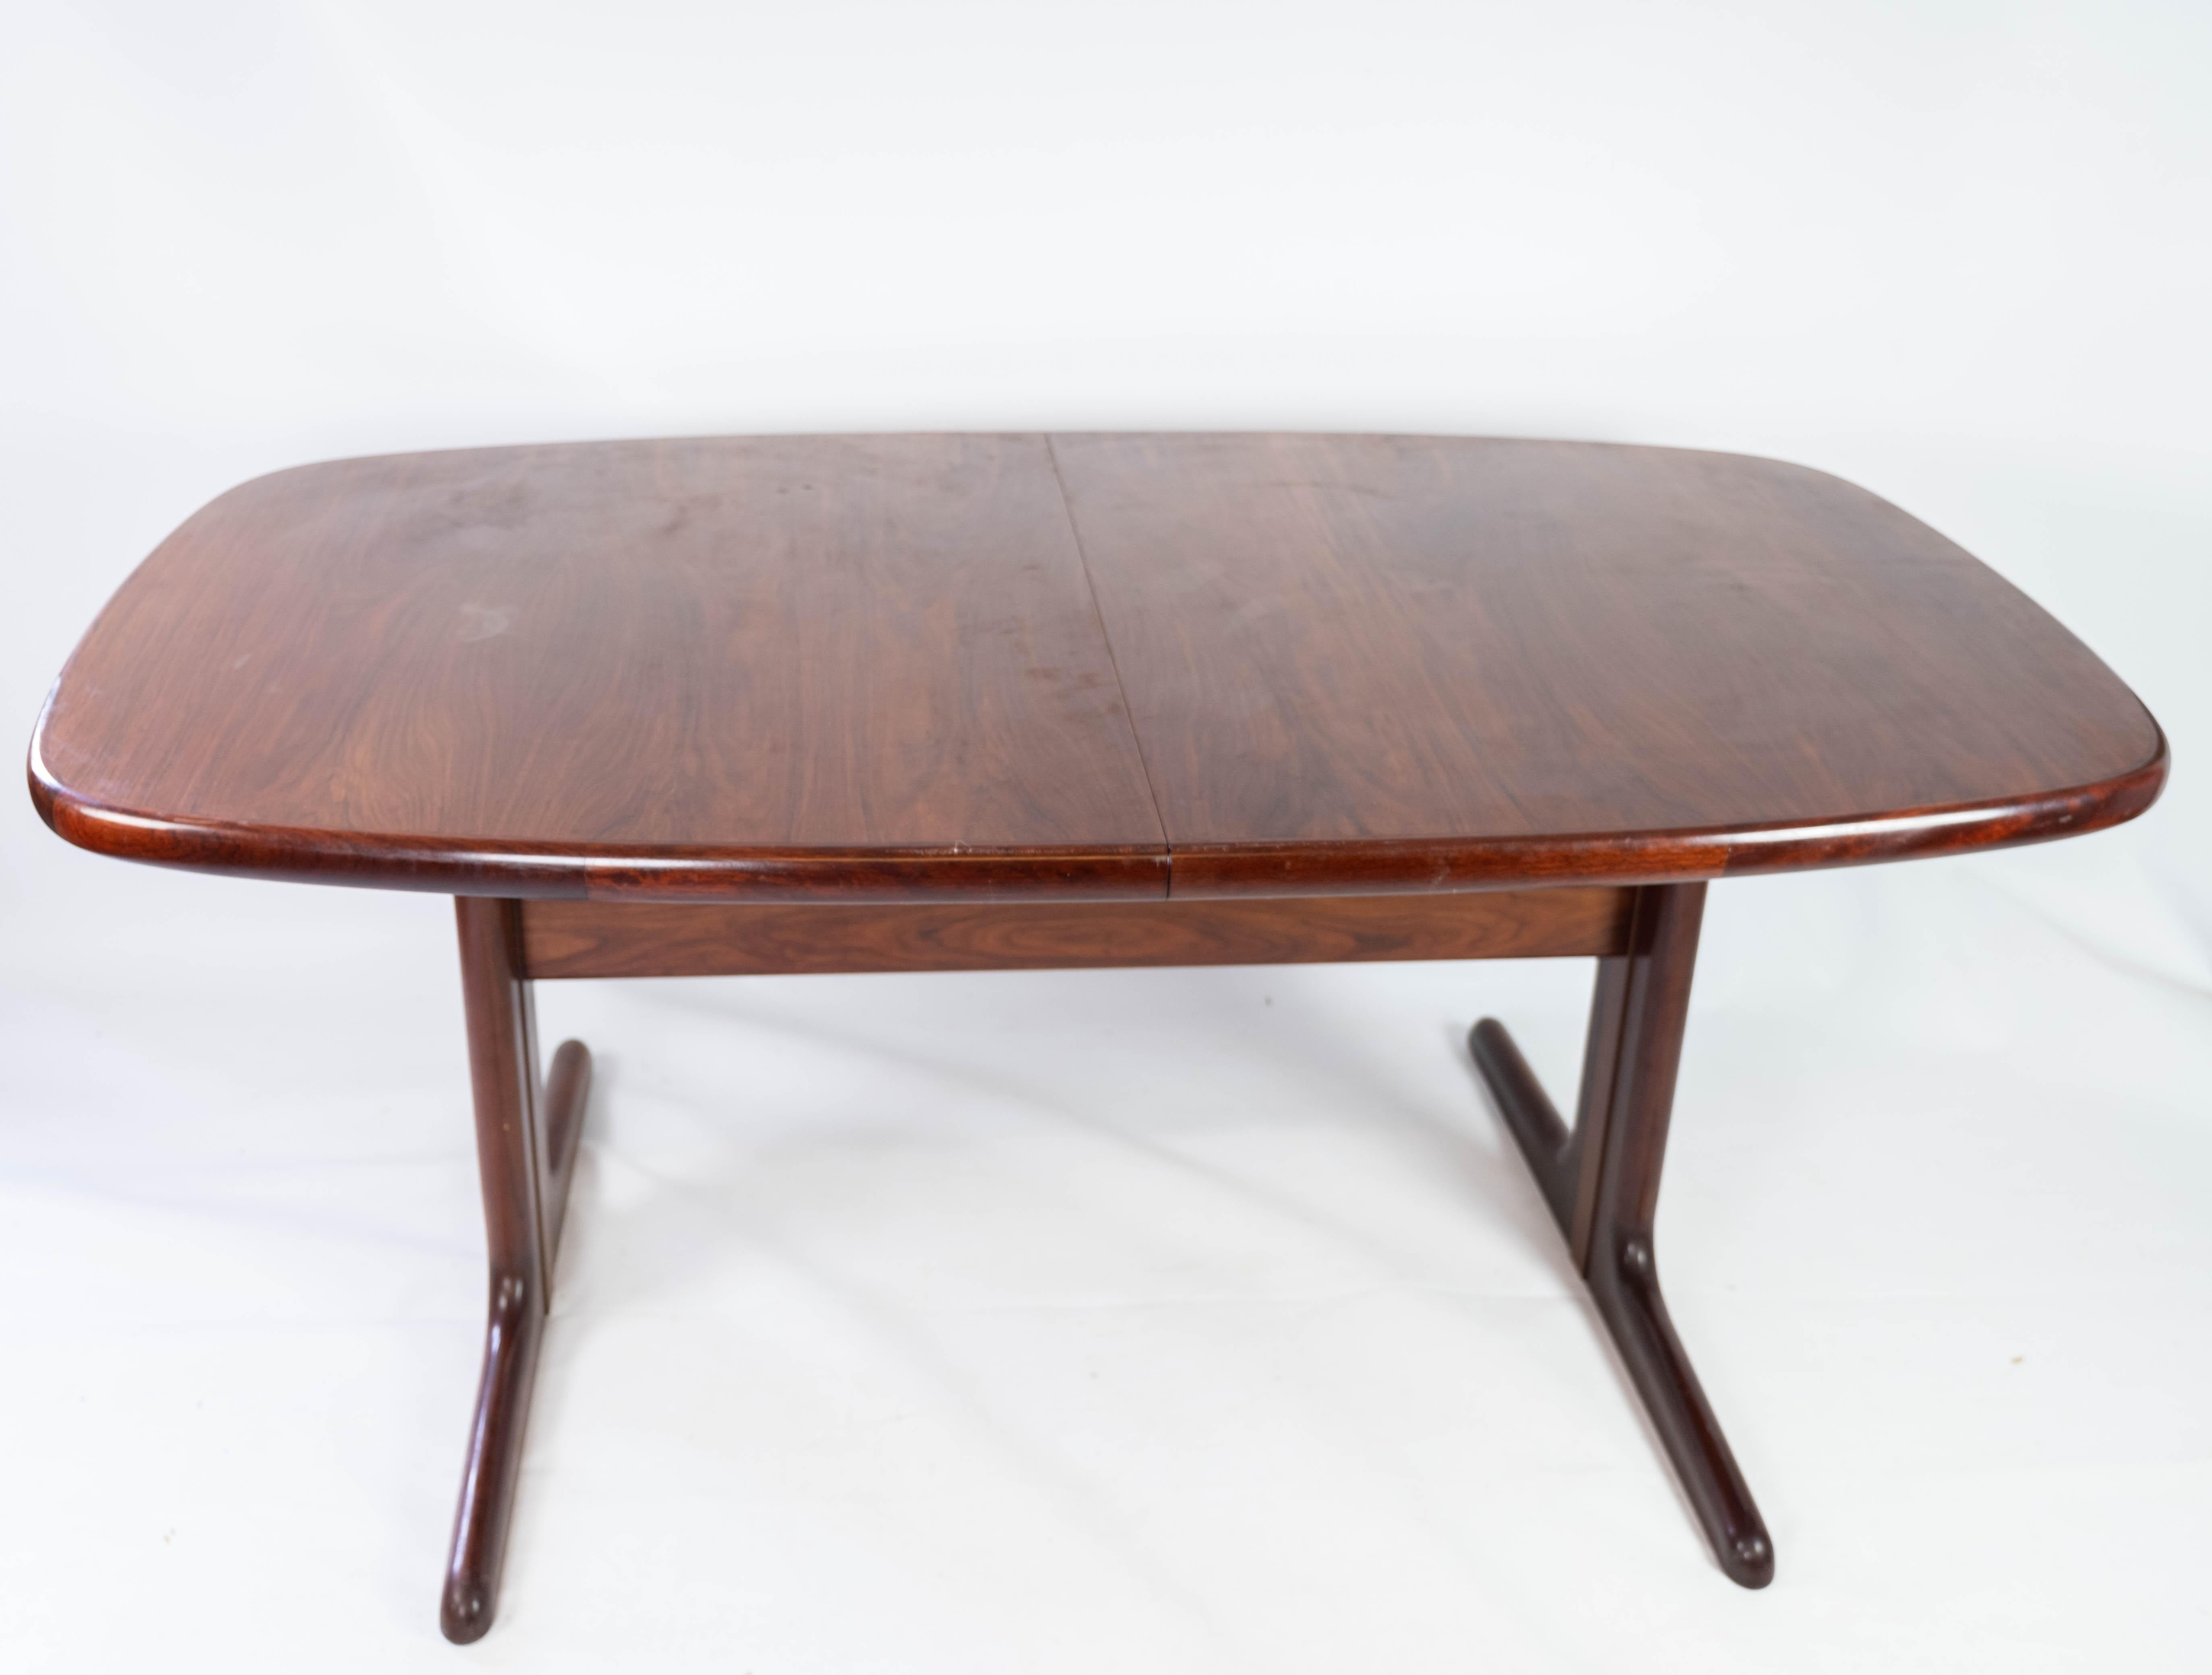 Dining table with extensions in rosewood of danish design manufactured by Skovby from the 1960s. The table is in great vintage condition.
Extensions are each 50 cm.